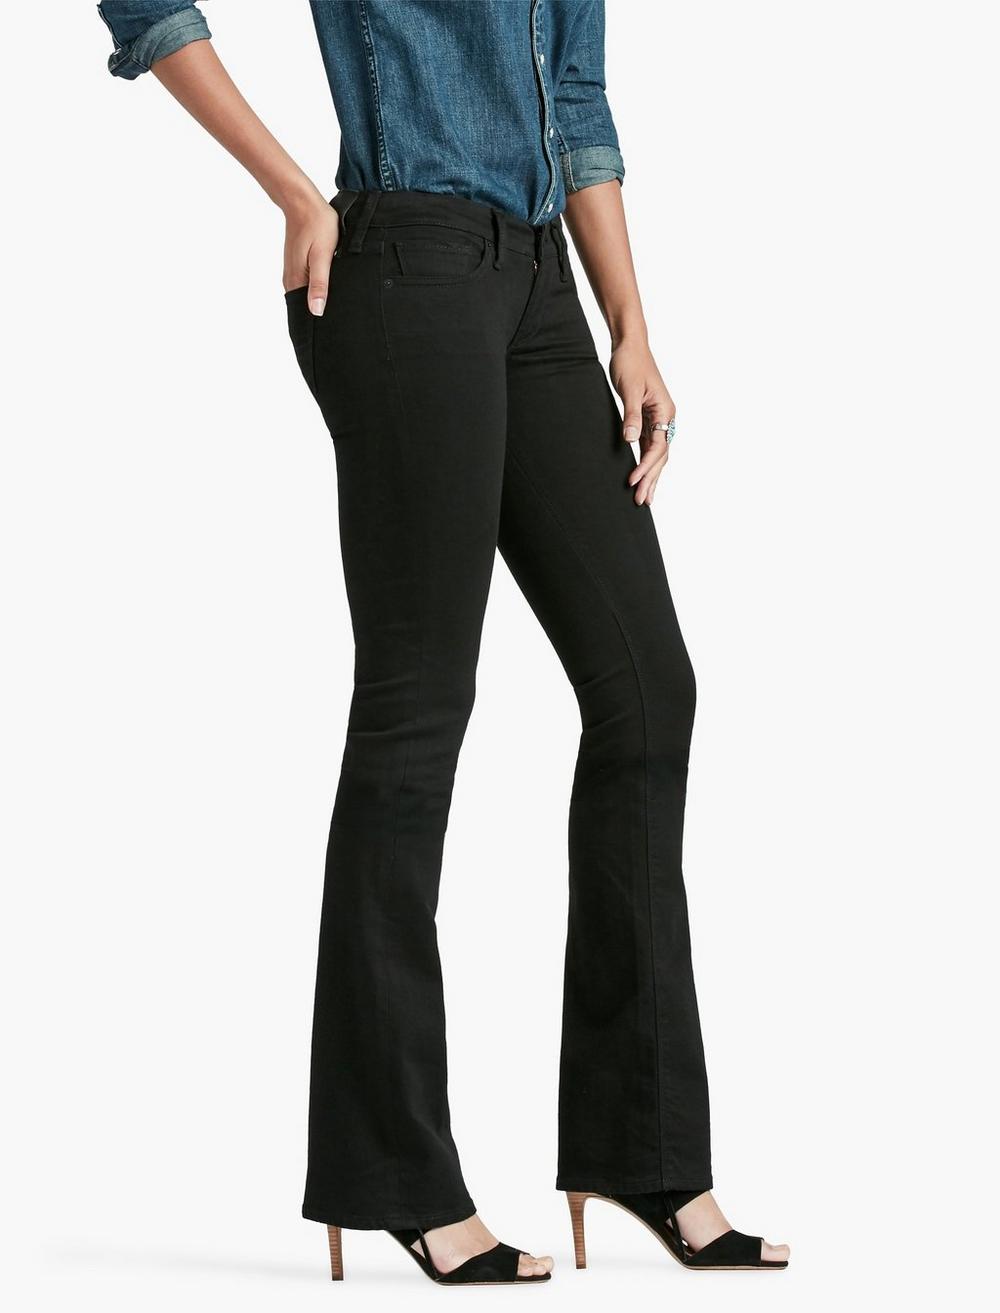 CHARLIE LOW RISE MINI BOOTCUT JEAN IN BLACK AMBER | Lucky Brand